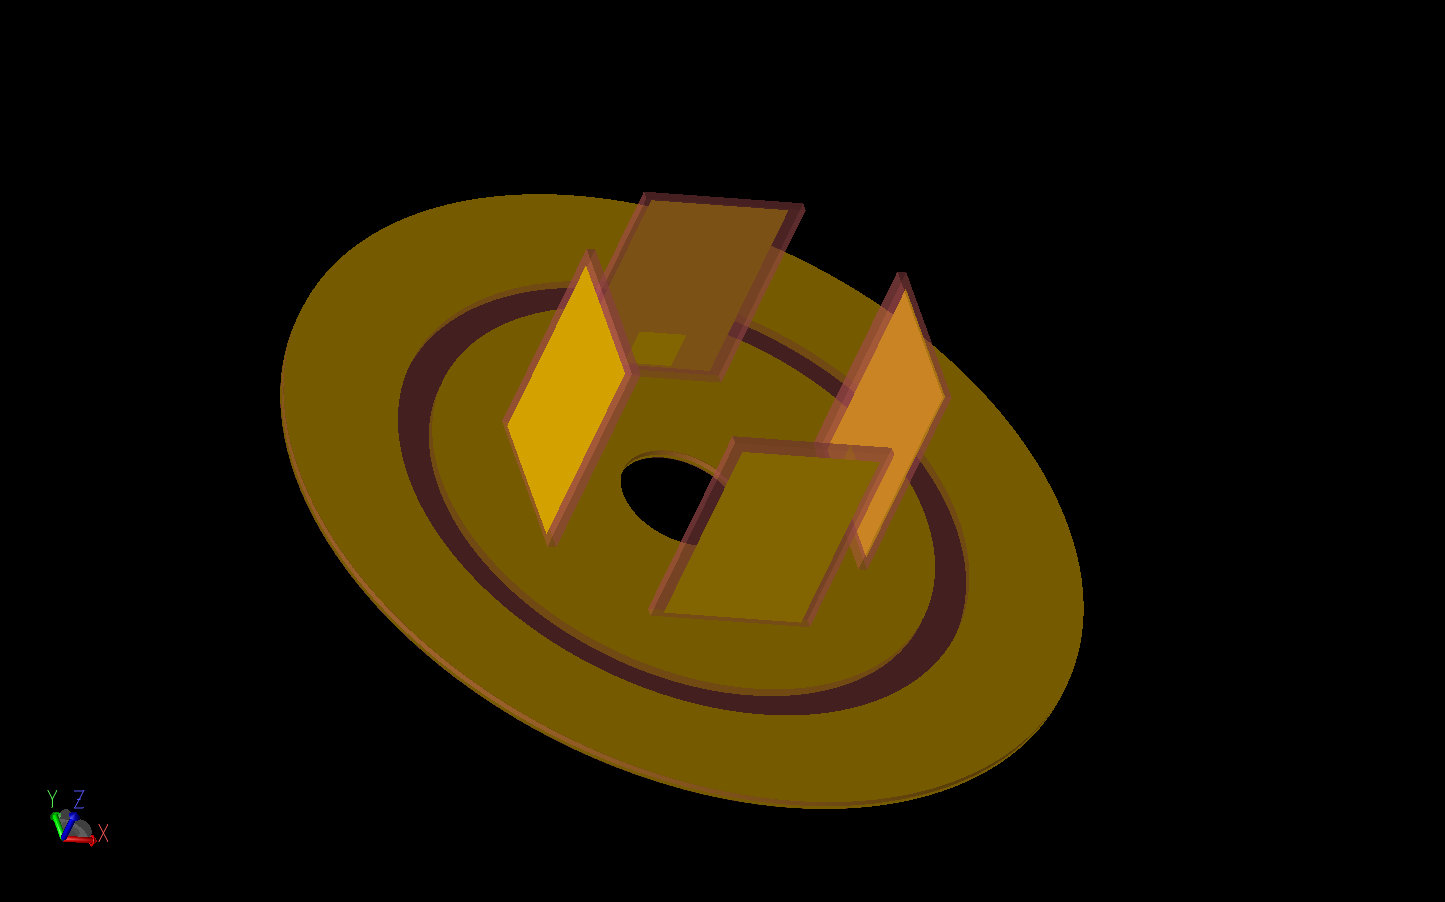 Figure 3: The lower electric monopole array is shown with the four elements arranged on the circular ground plane. There is a small feed patch on the inner side of each element.